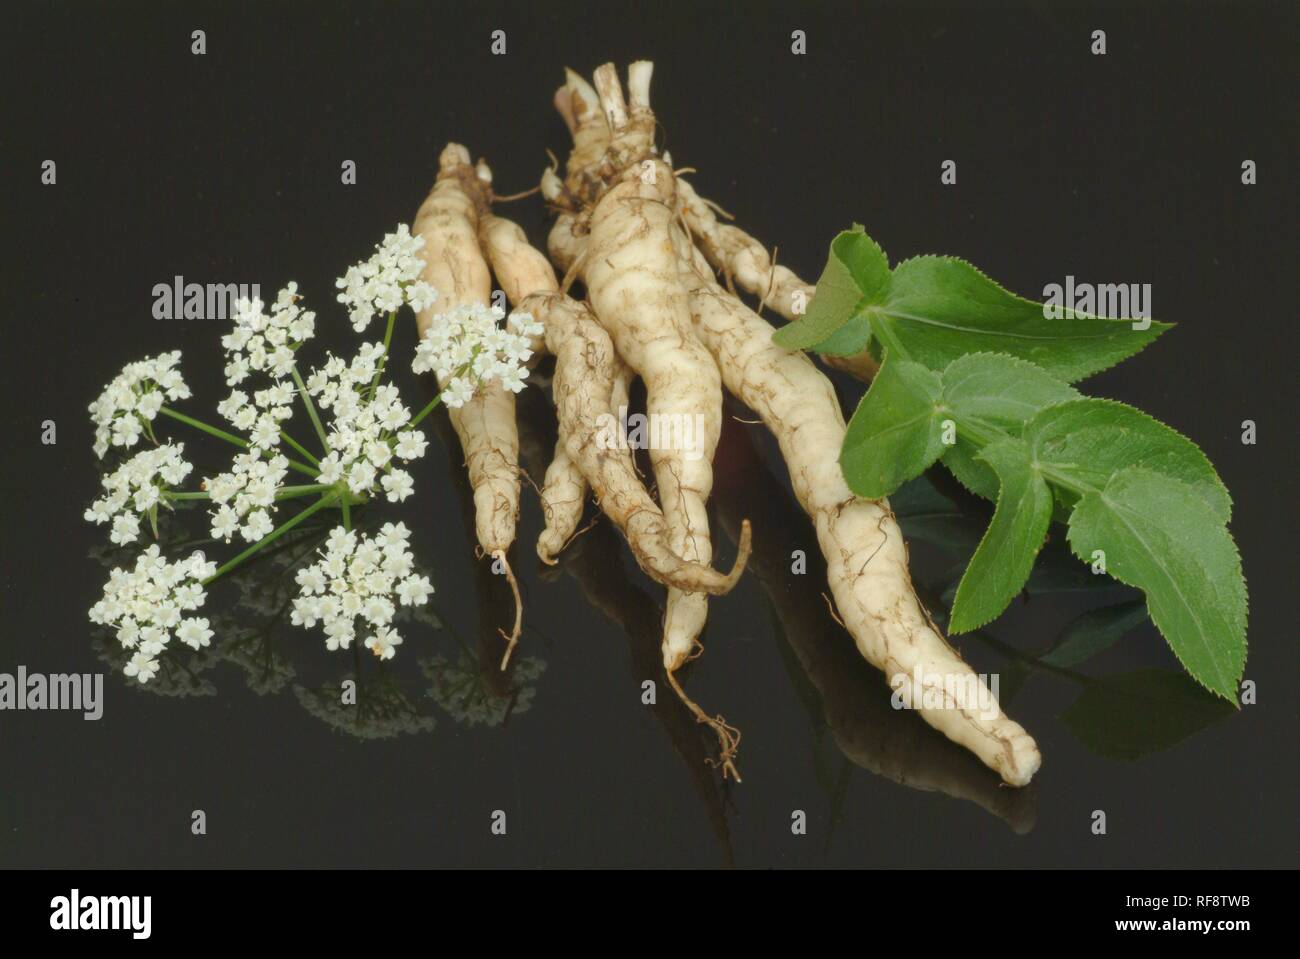 Skirret (Sium sisarum), roots, leaves and blossoms Stock Photo